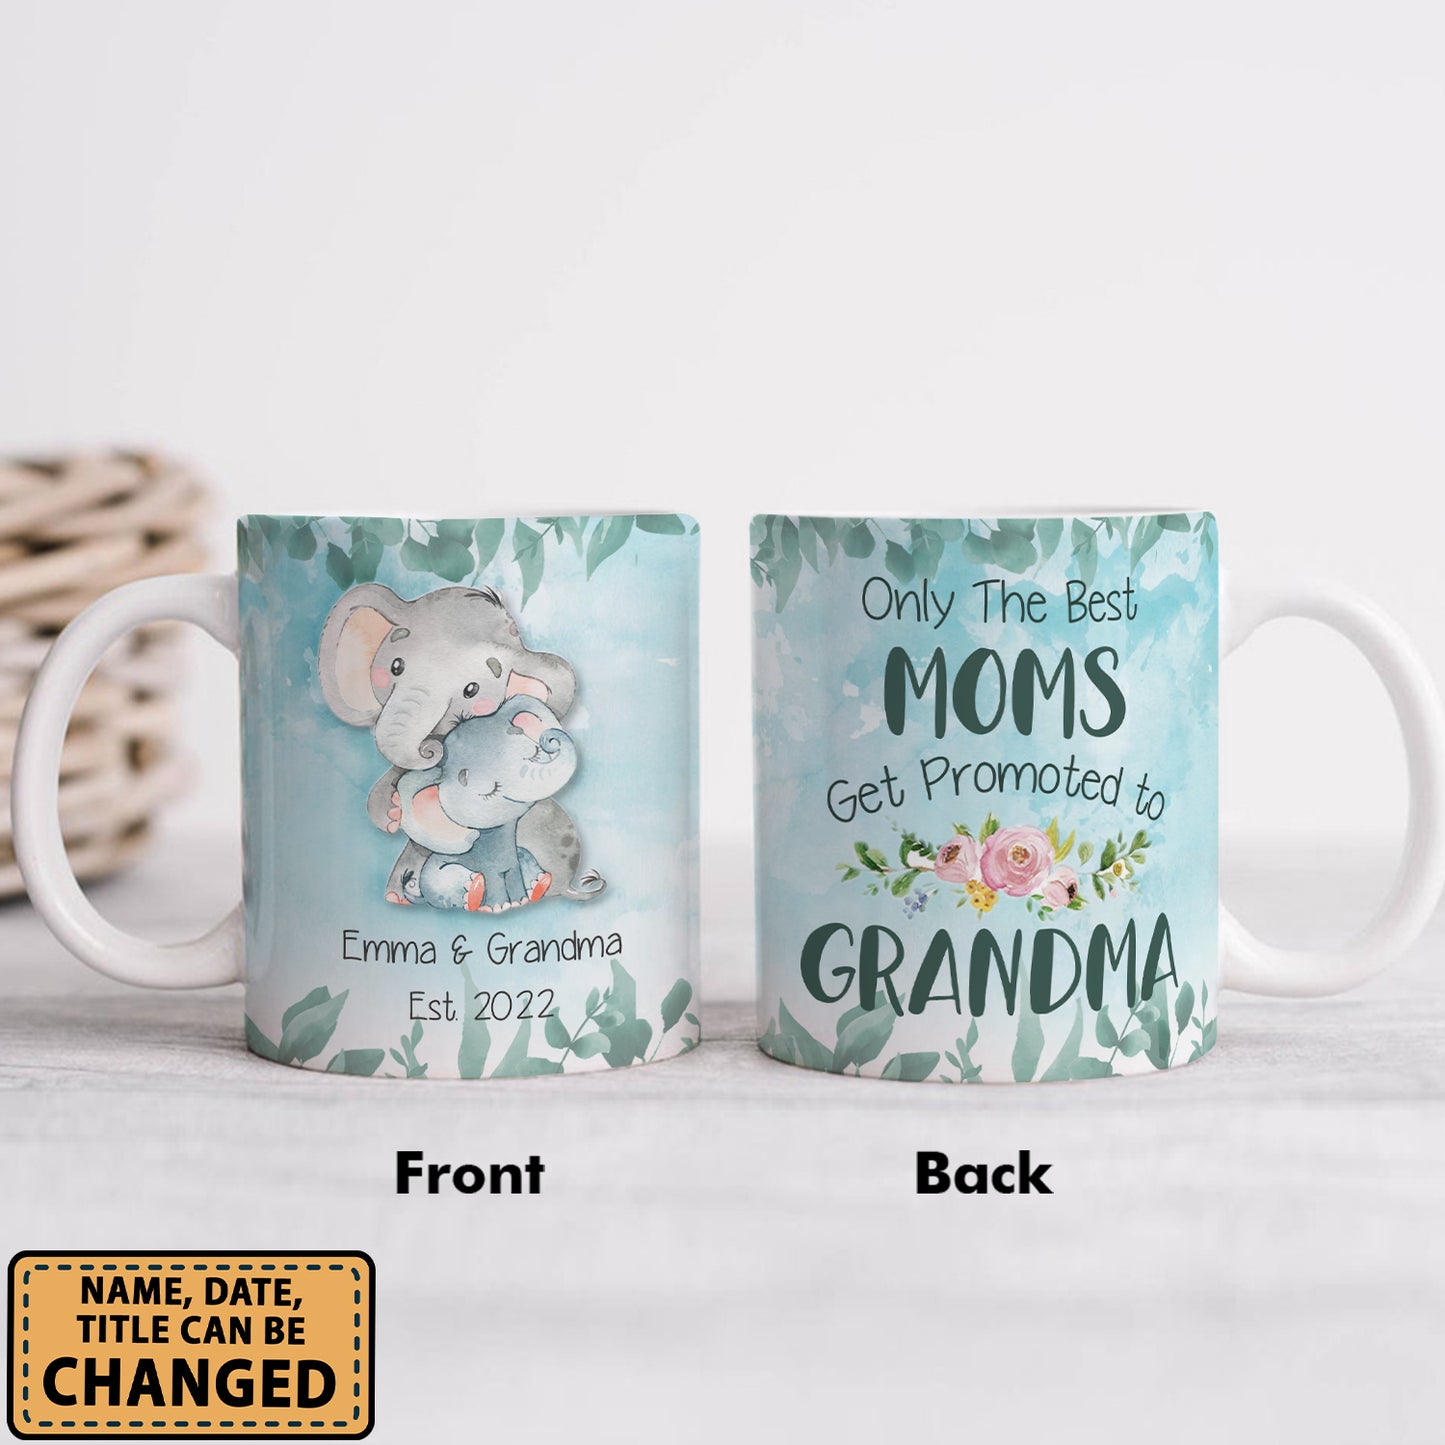 Personalized Grandma Coffee Mugs Only The Best Moms Get Promoted To Grandma New Grandmas Gifts Personalizedwitch